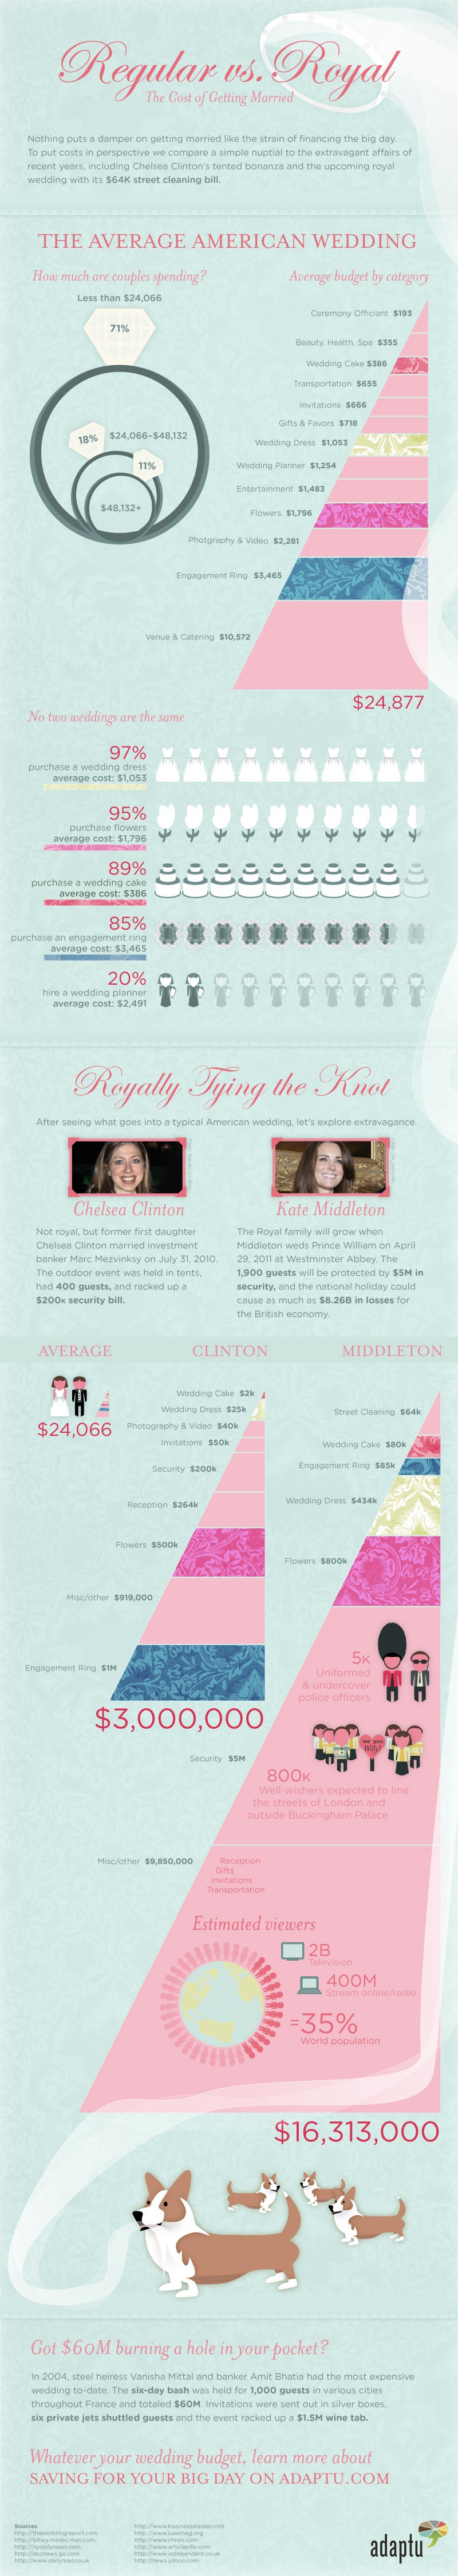 The Cost Of William & Kate's Wedding [Infographics] | Bit Rebels